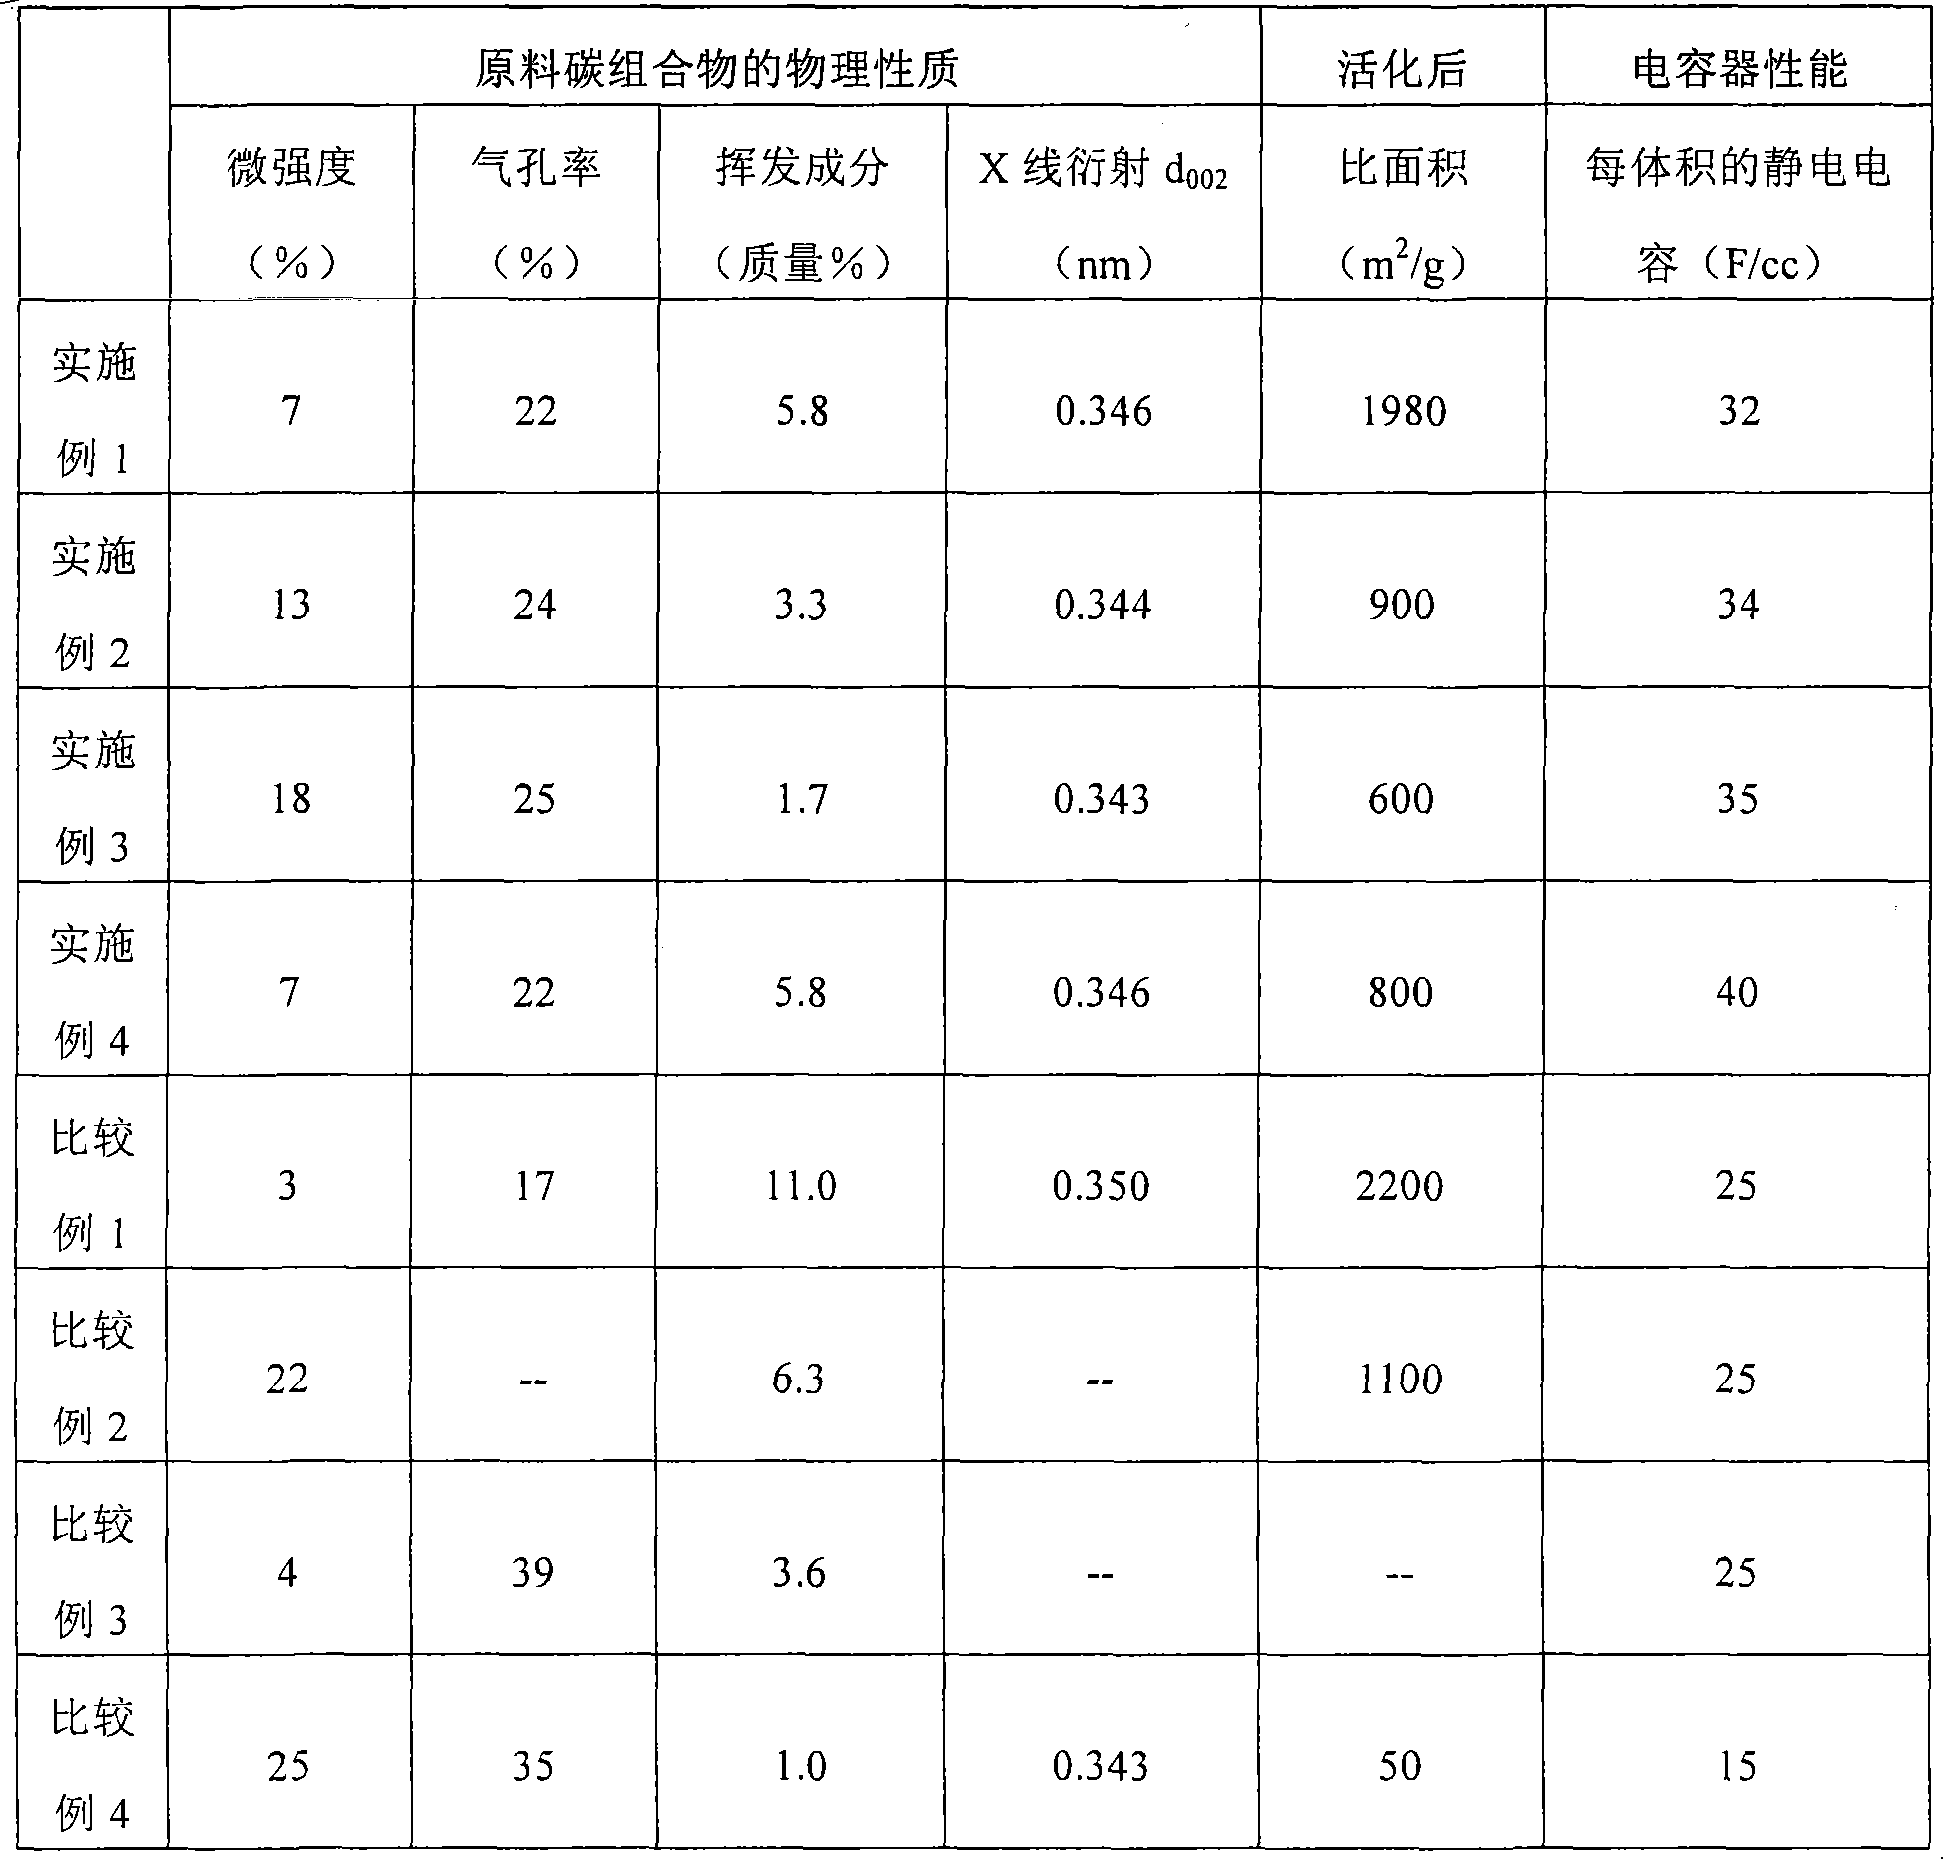 Original composition of carbon material for electrode of electric double-layer capacitor